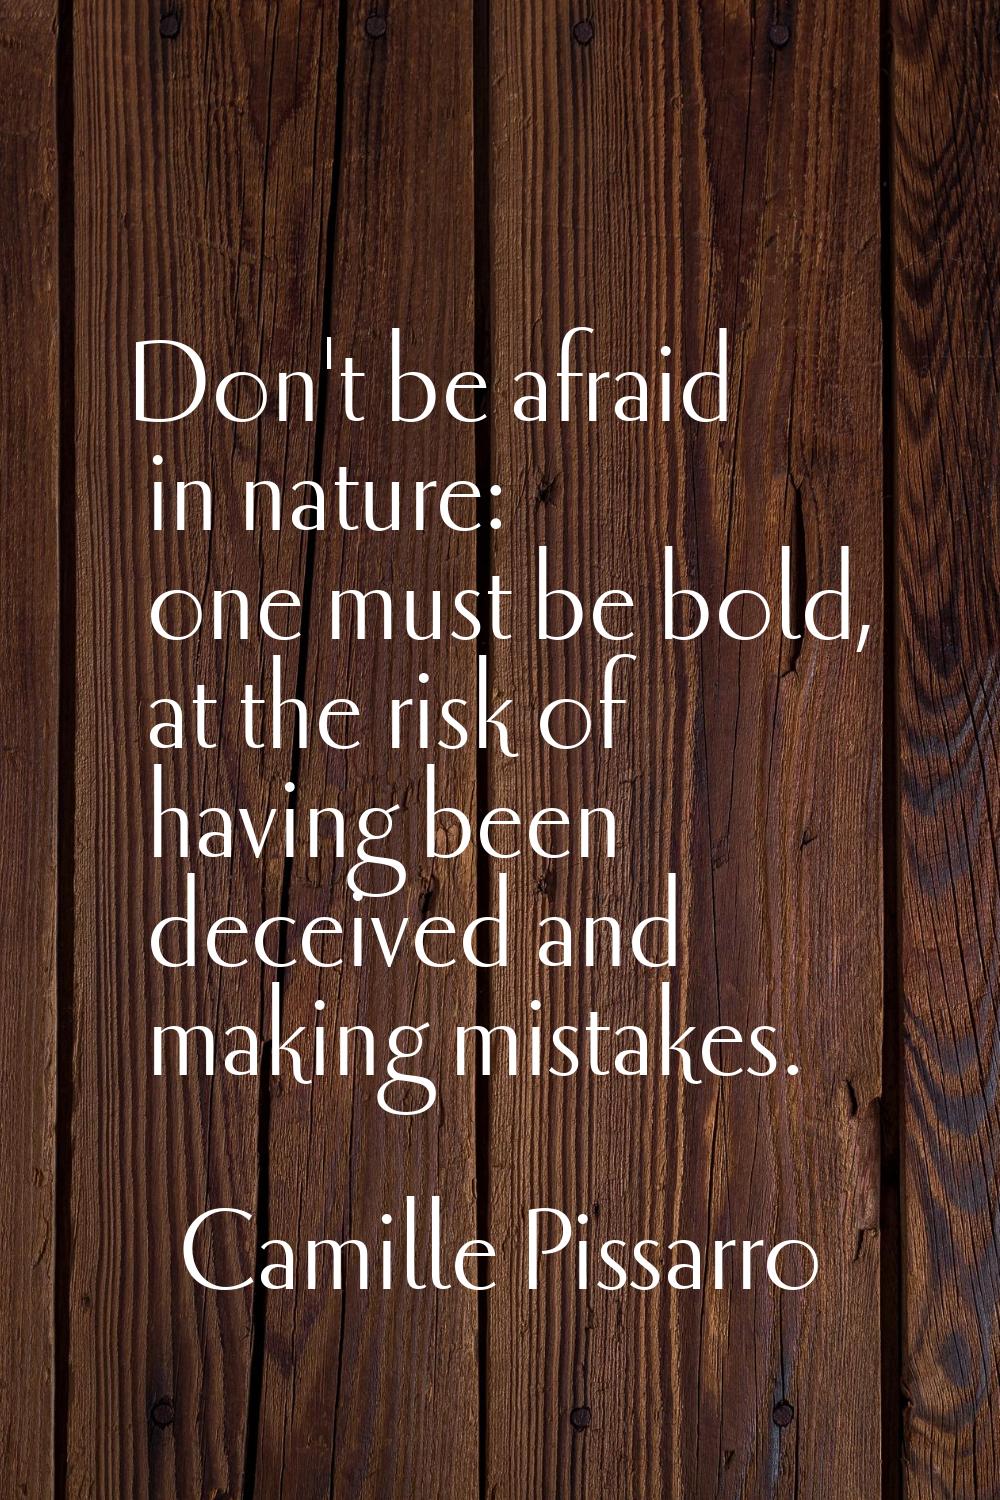 Don't be afraid in nature: one must be bold, at the risk of having been deceived and making mistake